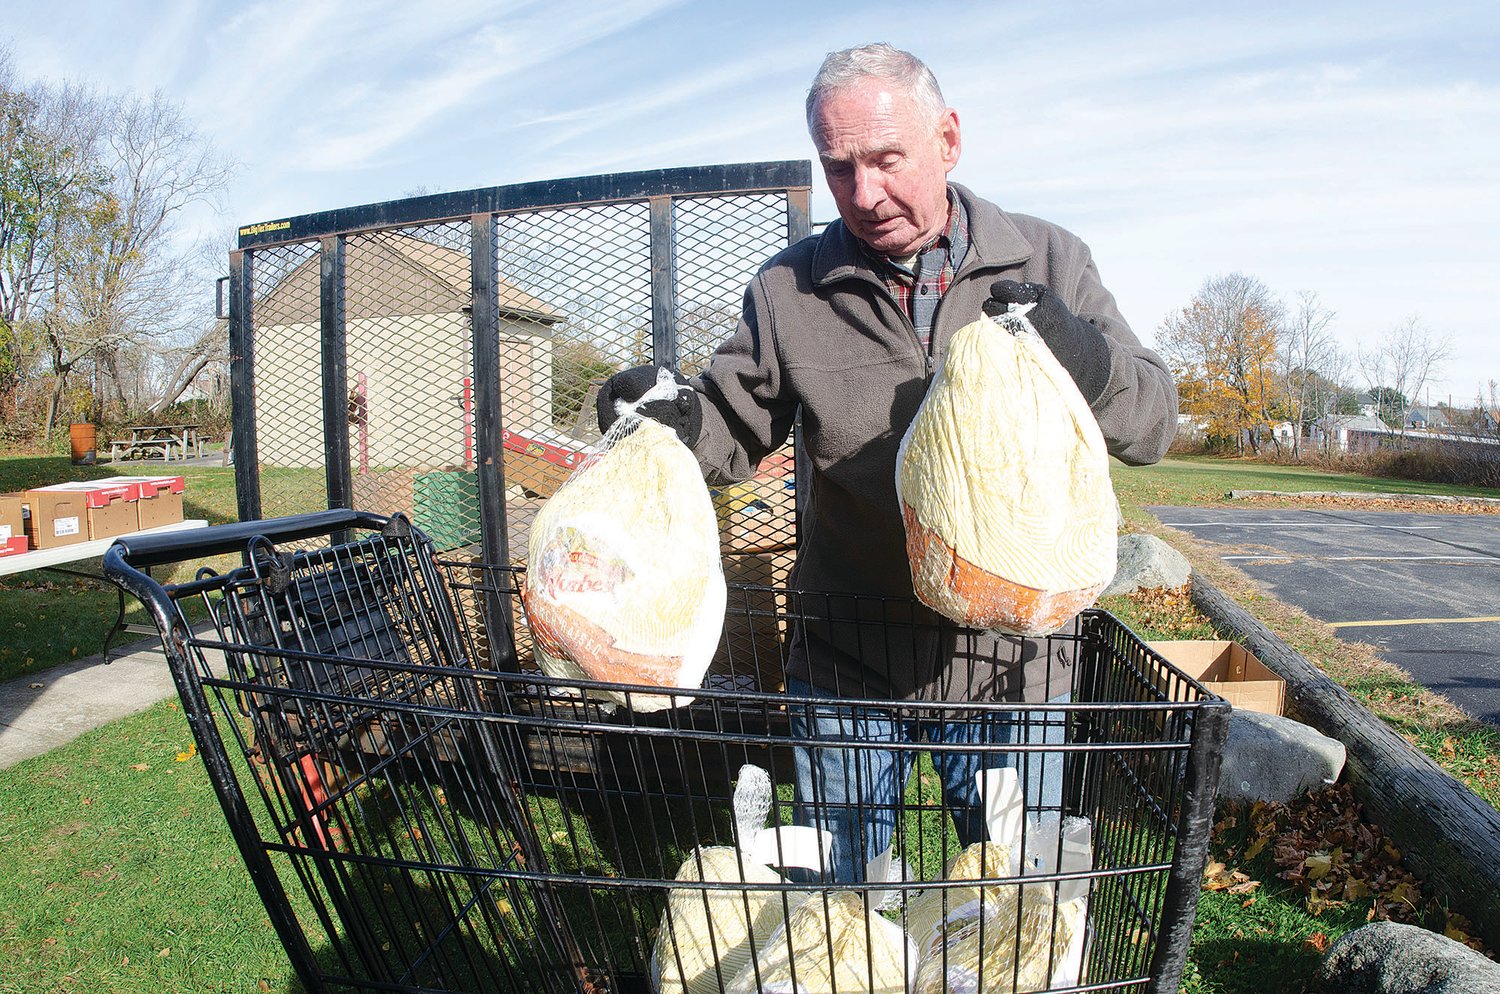 Portsmouth Community Food Bank volunteer Paul St. Laurent lifts two turkeys into a carriage while preparing an order for two families last Wednesday.